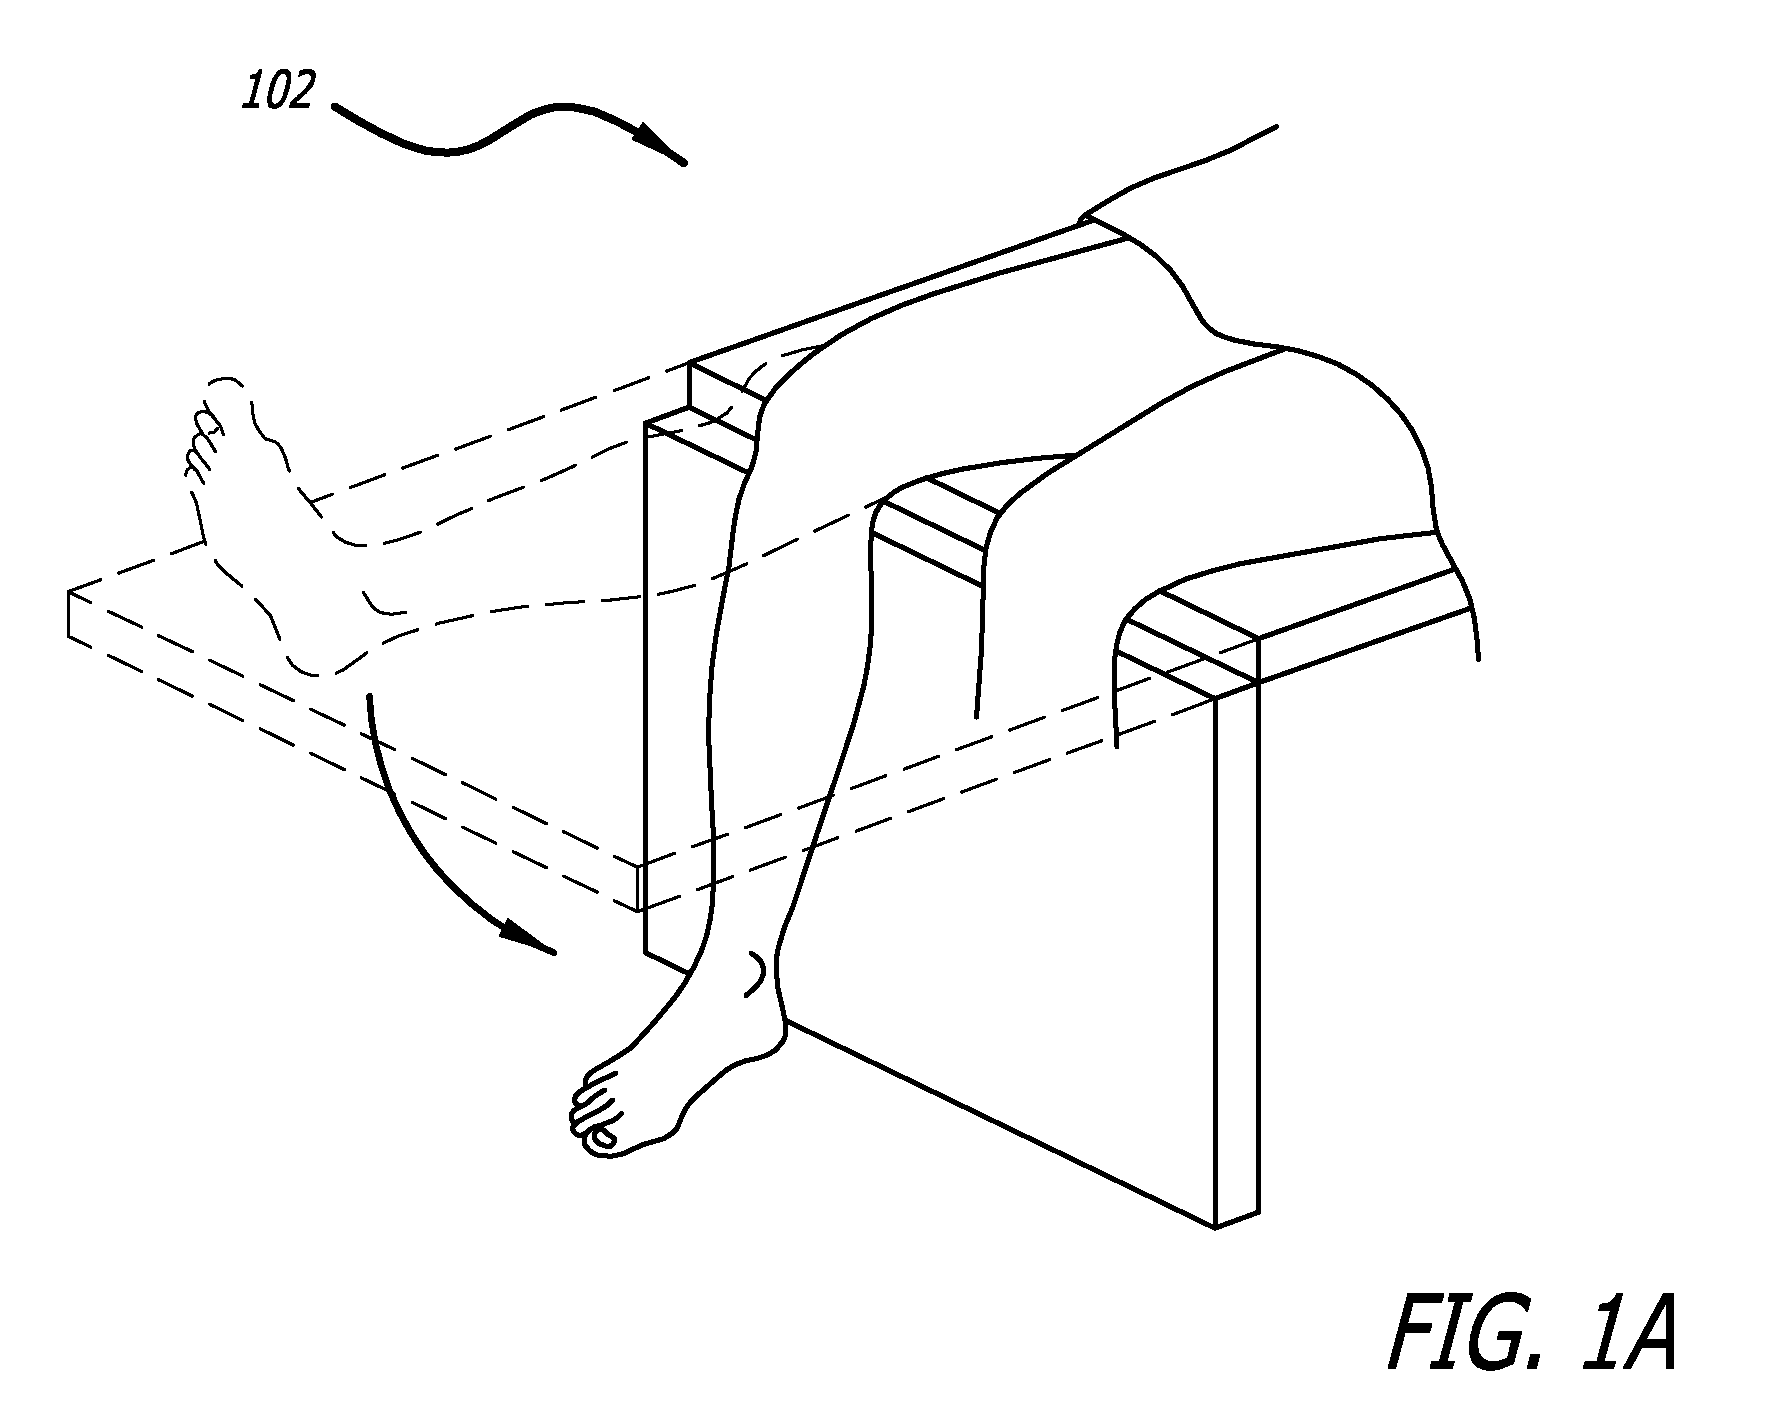 Surgical implantation method and devices for an extra-articular mechanical energy absorbing apparatus